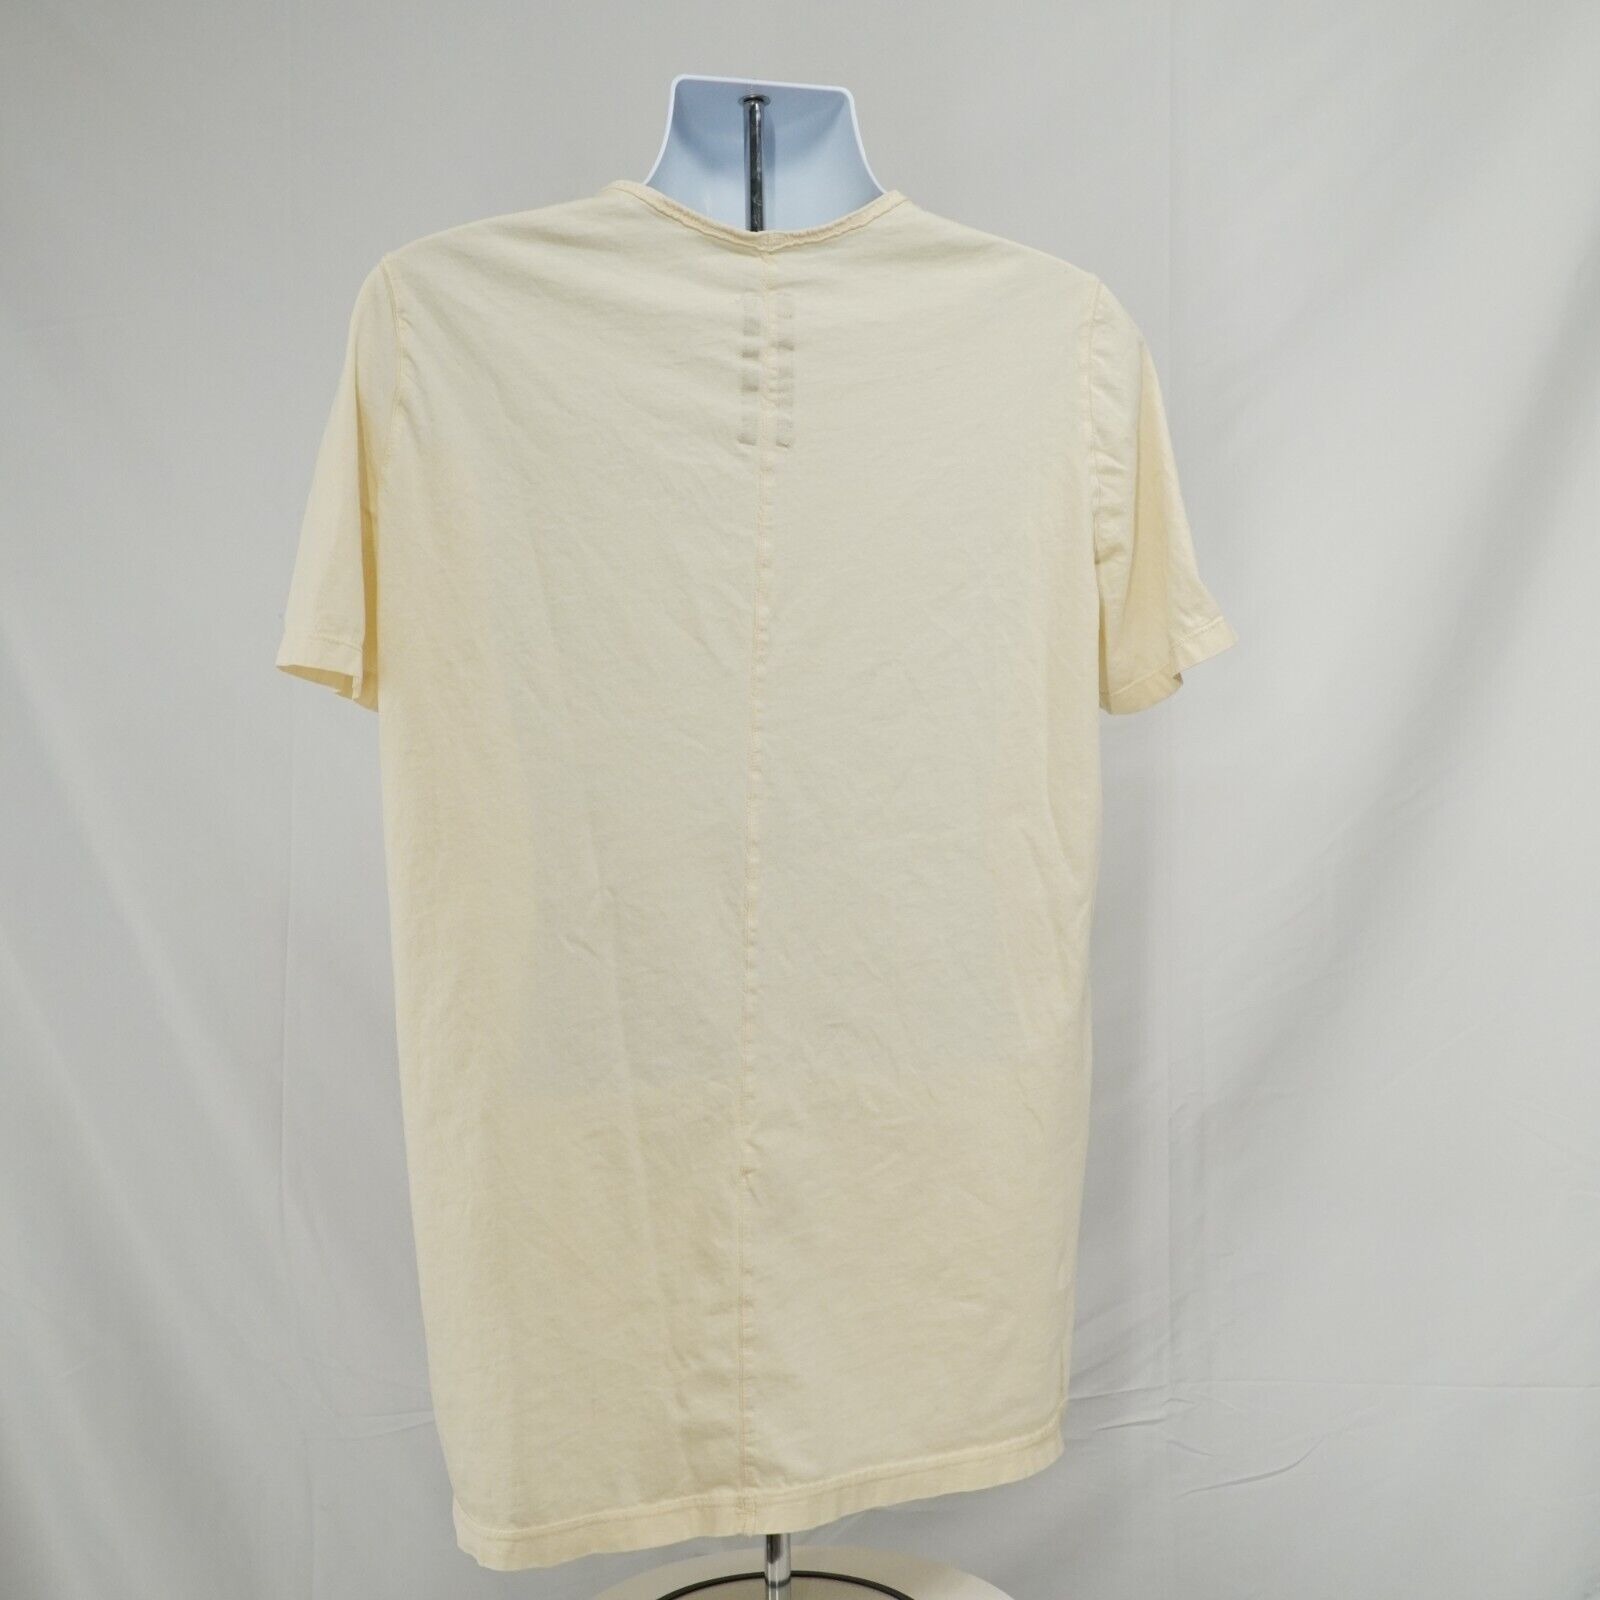 DRKSDHW Patched Level Tee Milk White Cotton - Lar - 15